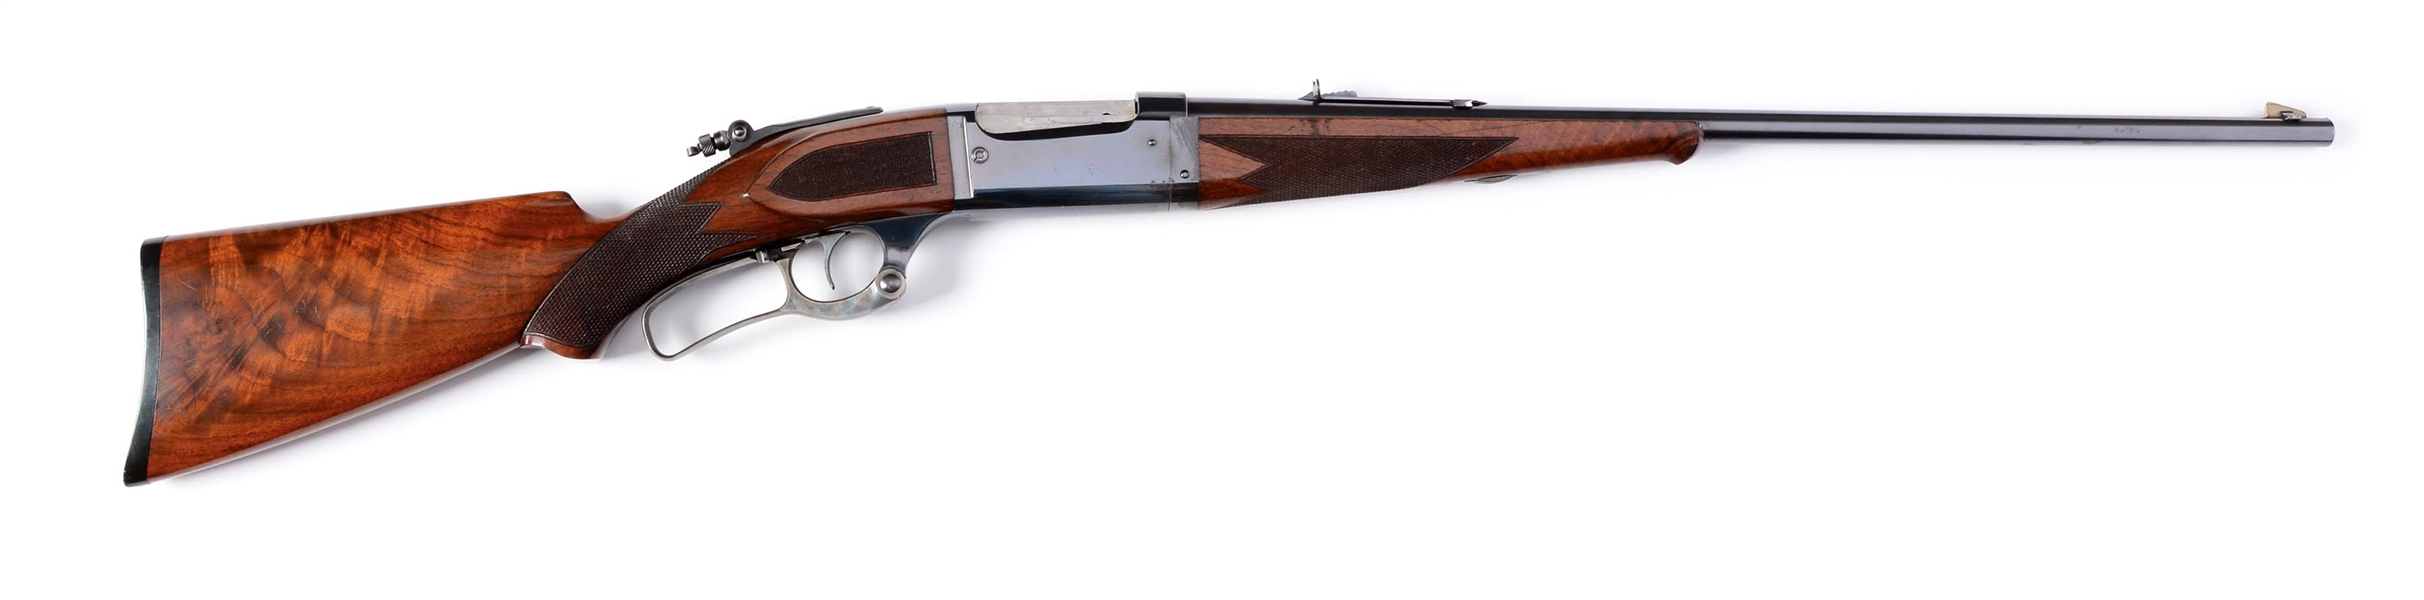 (C) HIGH FINISH & POLISH PERCH BELLY SAVAGE DELUXE MODEL 1899 LEVER ACTION RIFLE (1911).